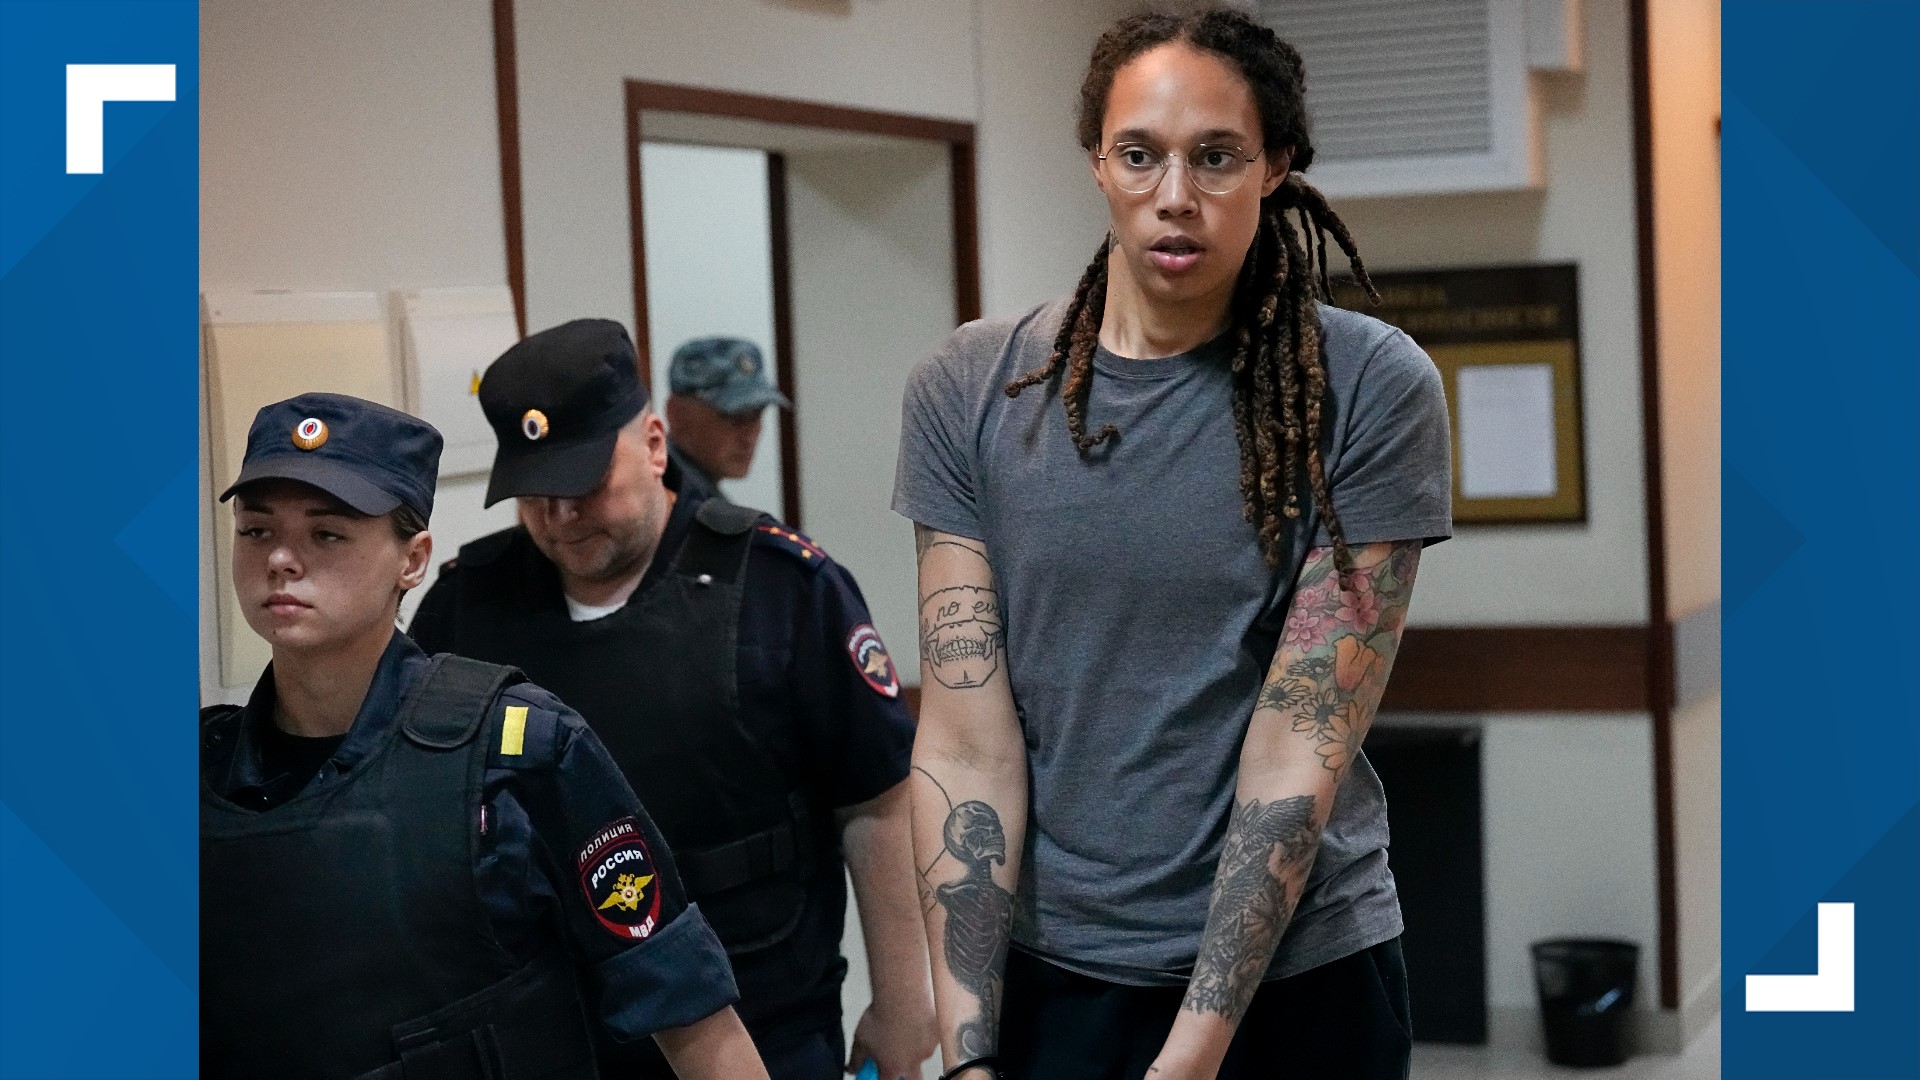 Griner was sentenced to nine years in prison for drug possession in early August.